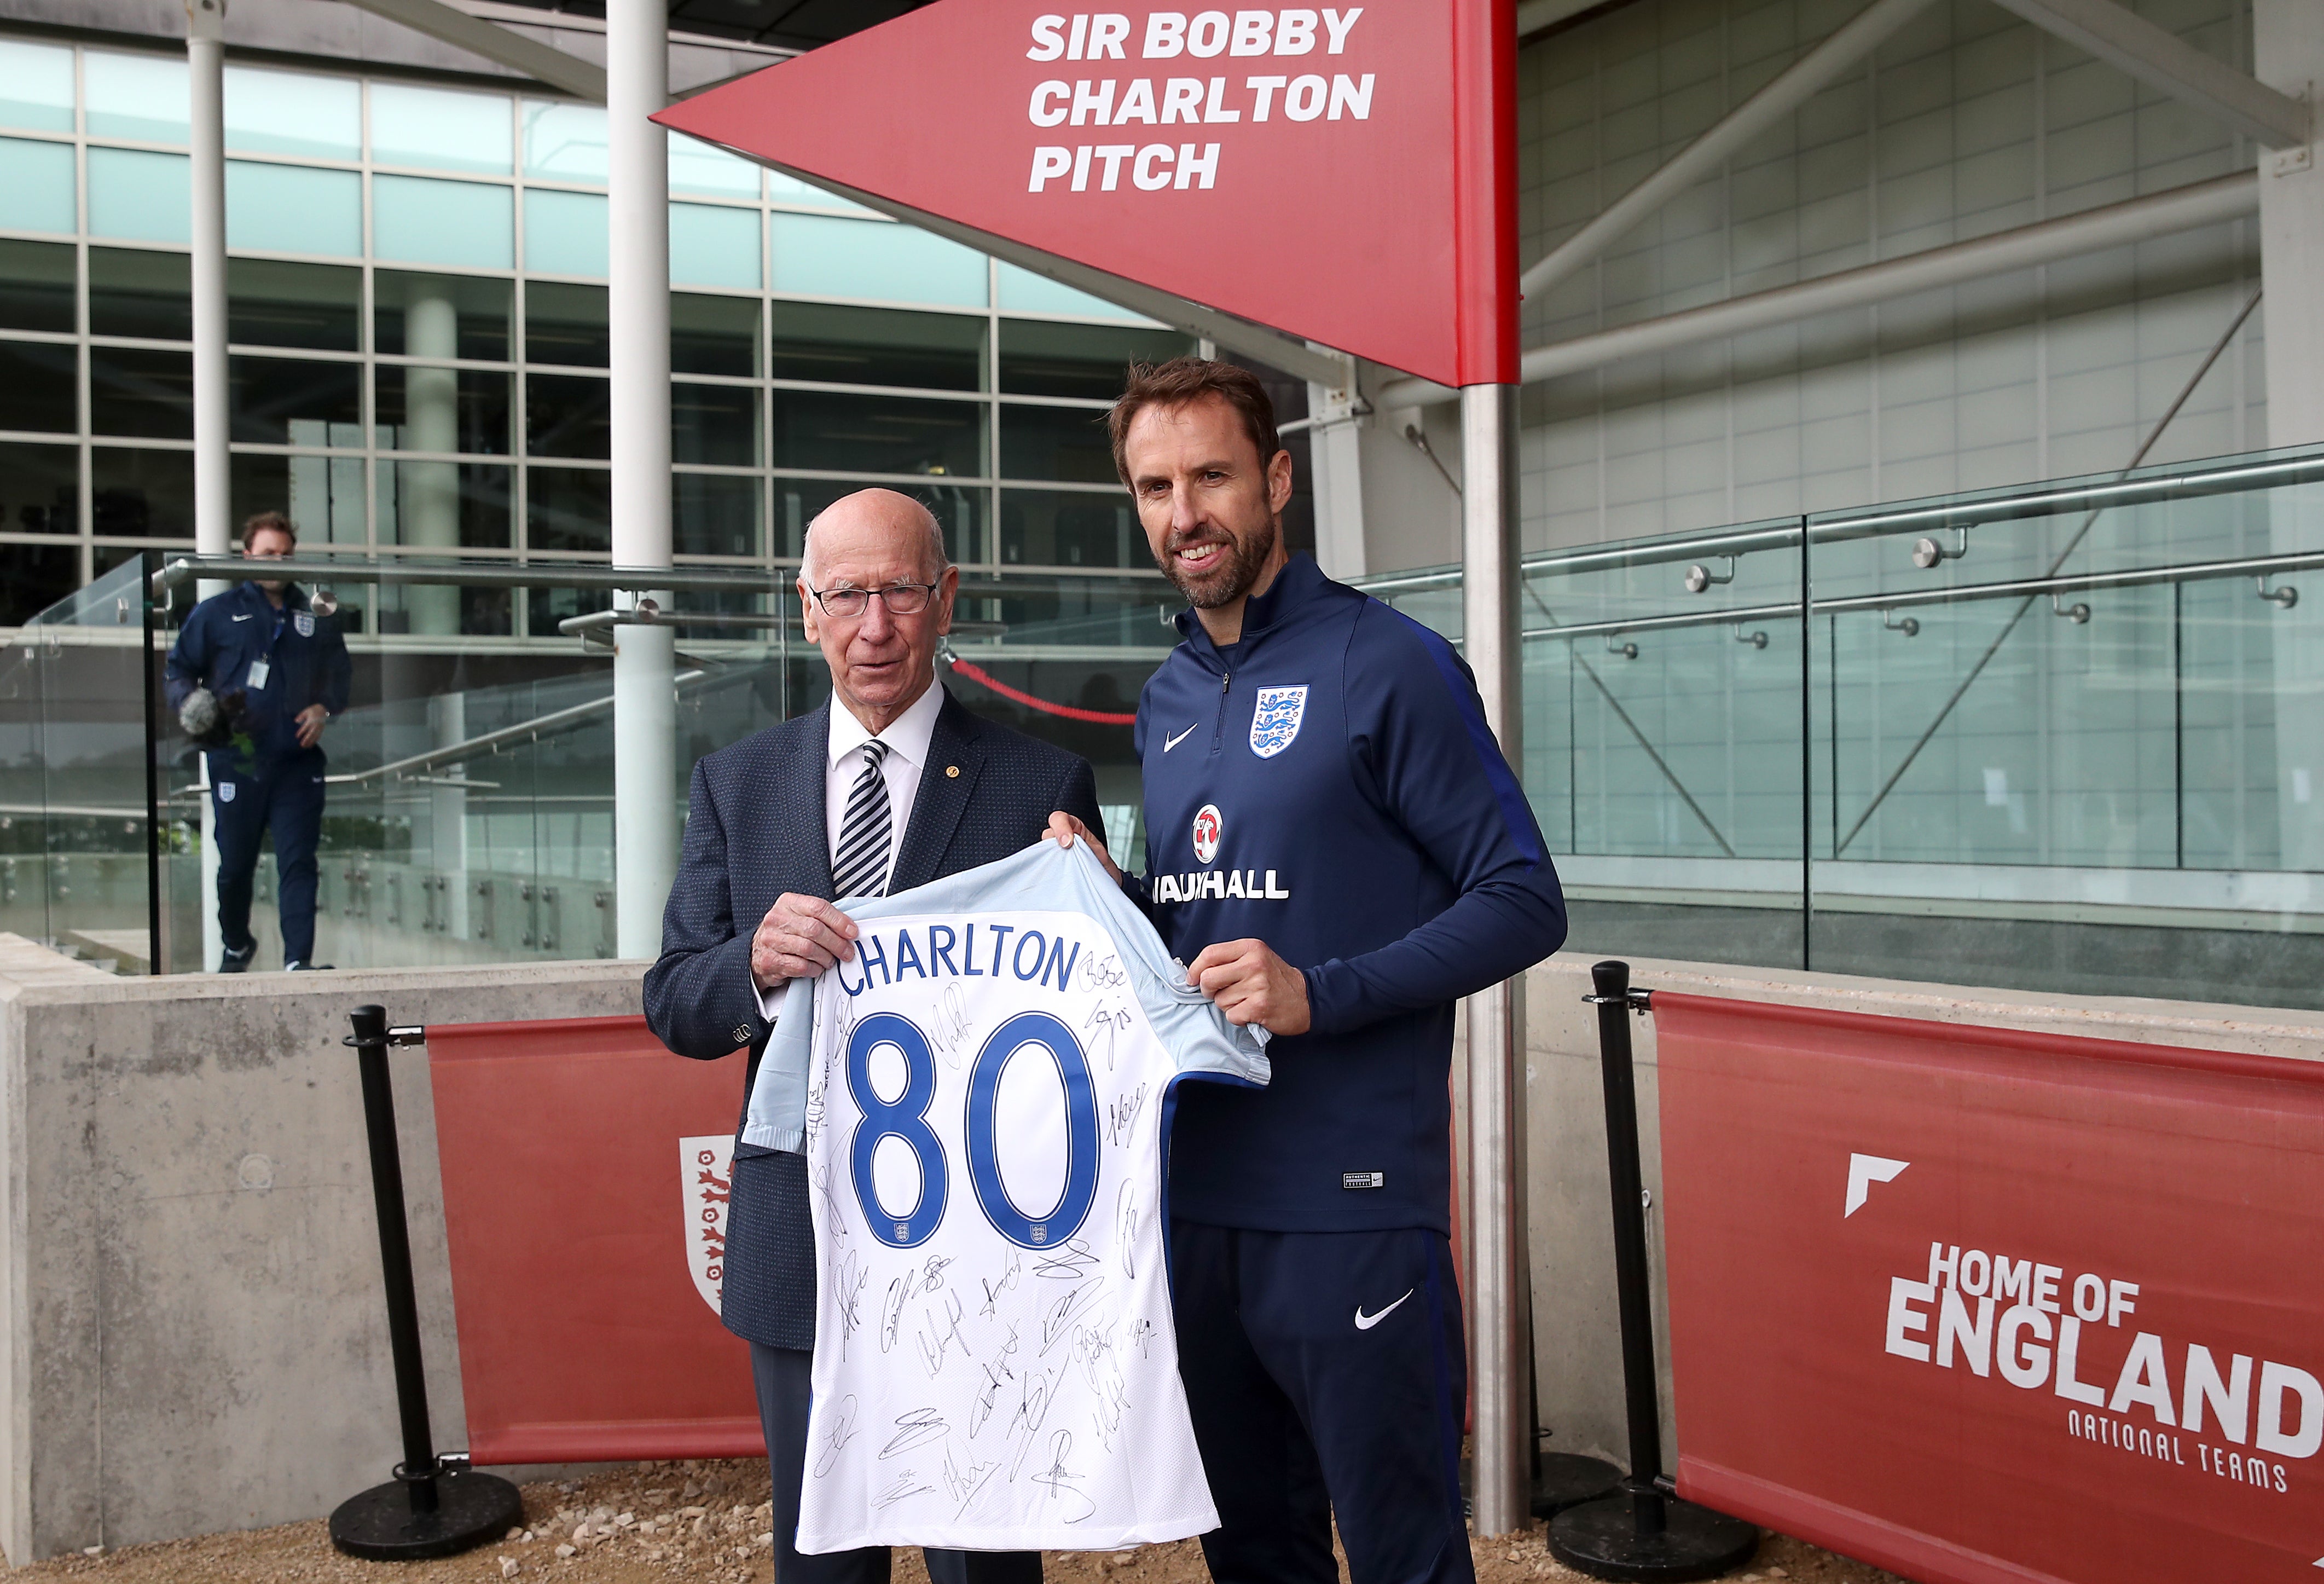 Sir Bobby Charlton, left, was presented with an England shirt to mark his 80th birthday in 2017 by current manager Gareth Southgate (Nick Potts/PA)